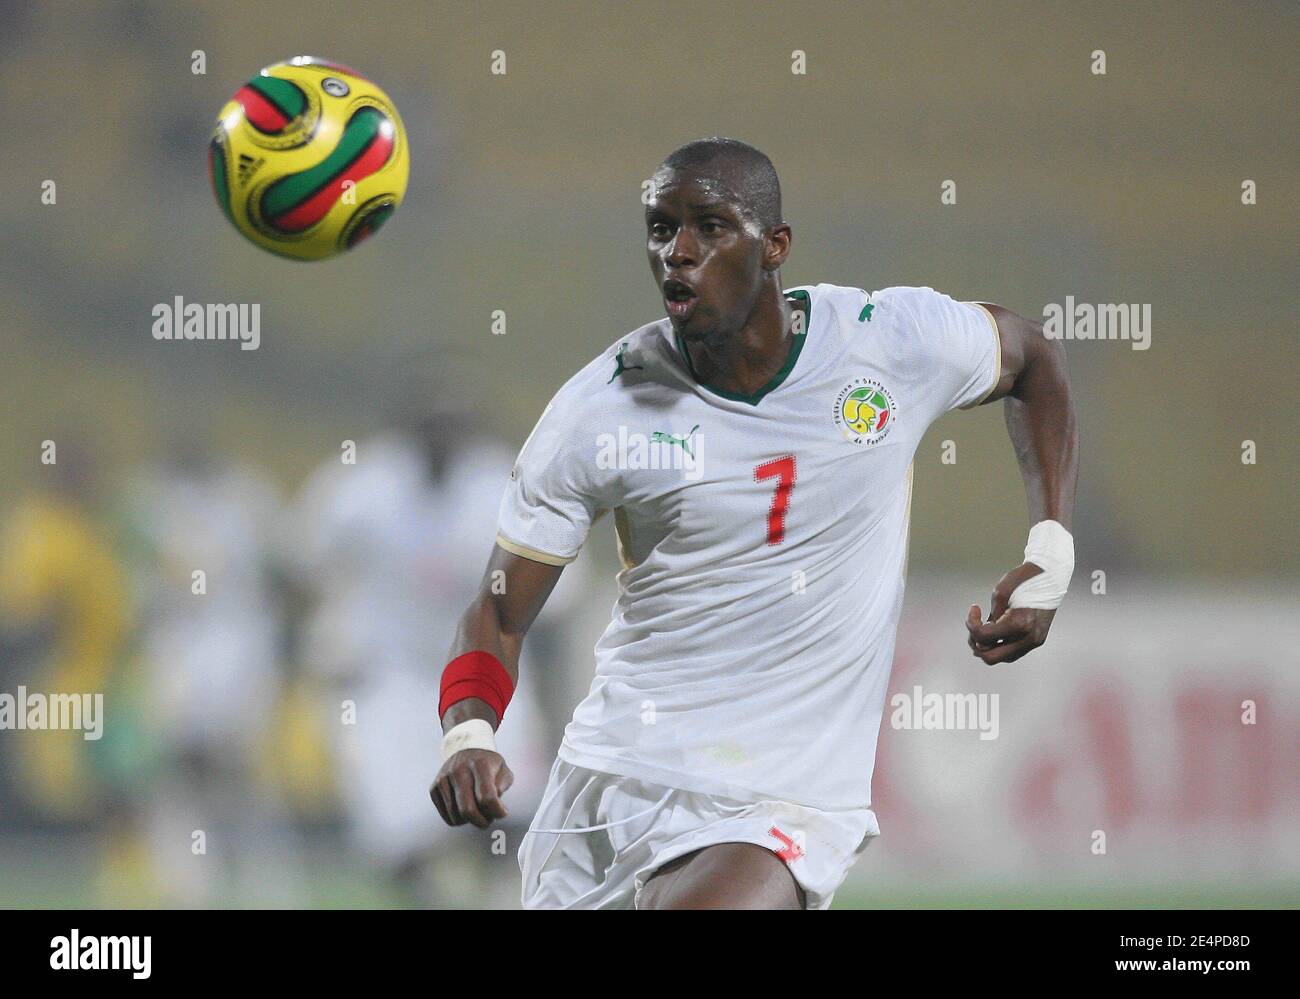 Senegal's Henri Camara during the African Cup of Nations soccer match, Senegal vs South Africa in Kumasi, Ghana on January 31, 2008. The match ended in a 1-1 draw. Senegal failed to qualify for the next round of the competition. Photo by Steeve McMay/Cameleon/ABACAPRESS.COM Stock Photo